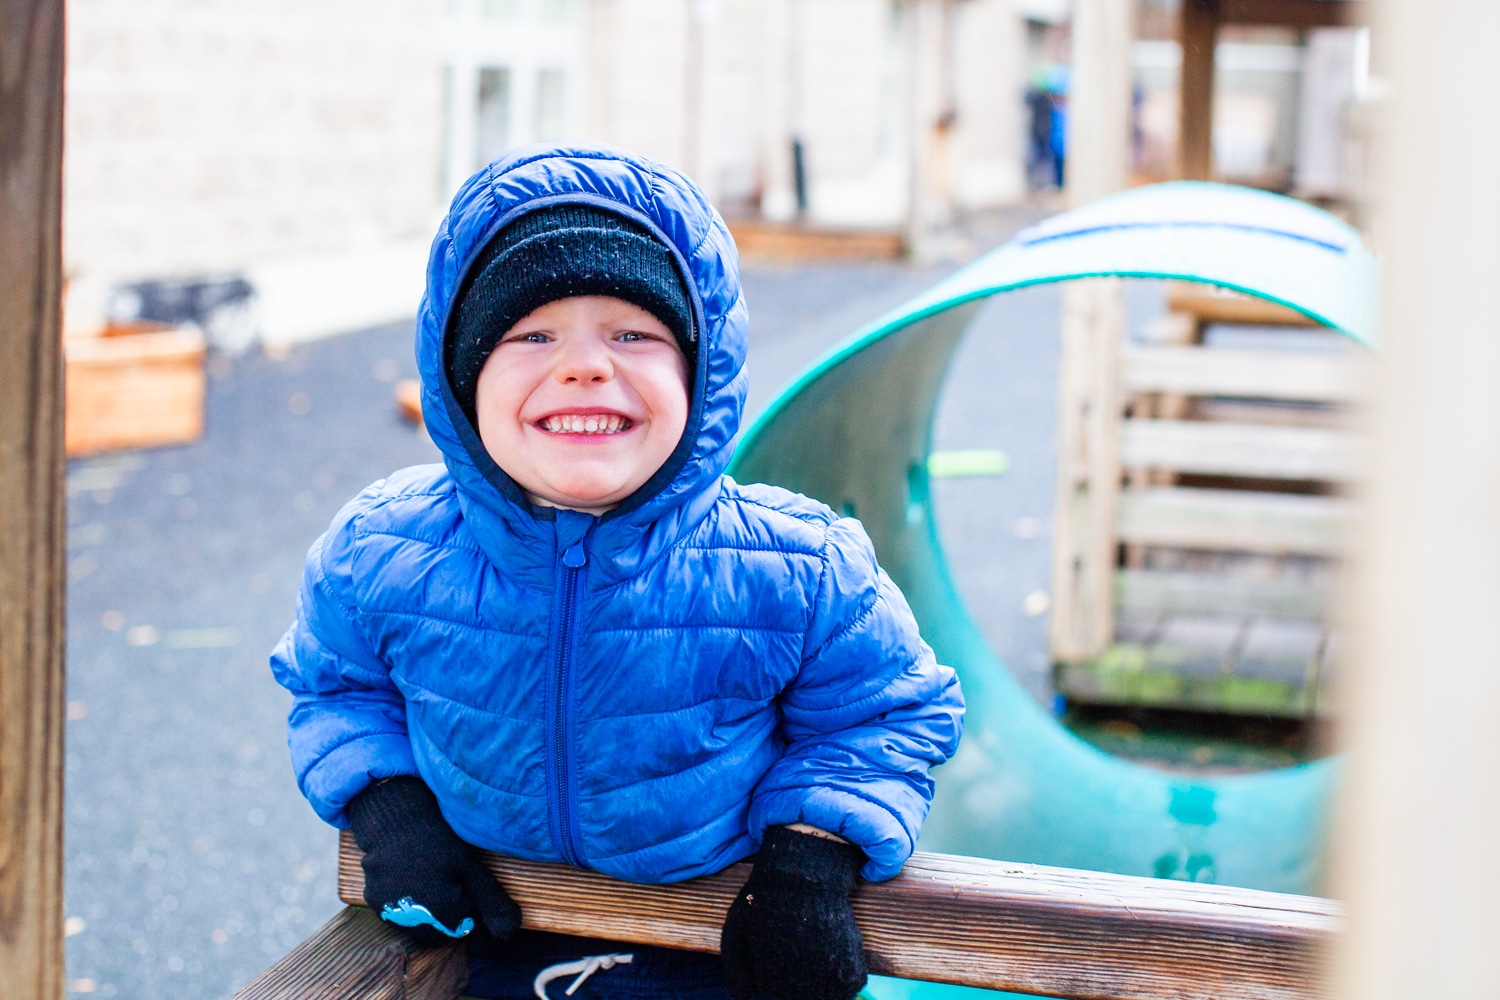 Child wearing blue coat and hoodie smiling at the camera while playing outside